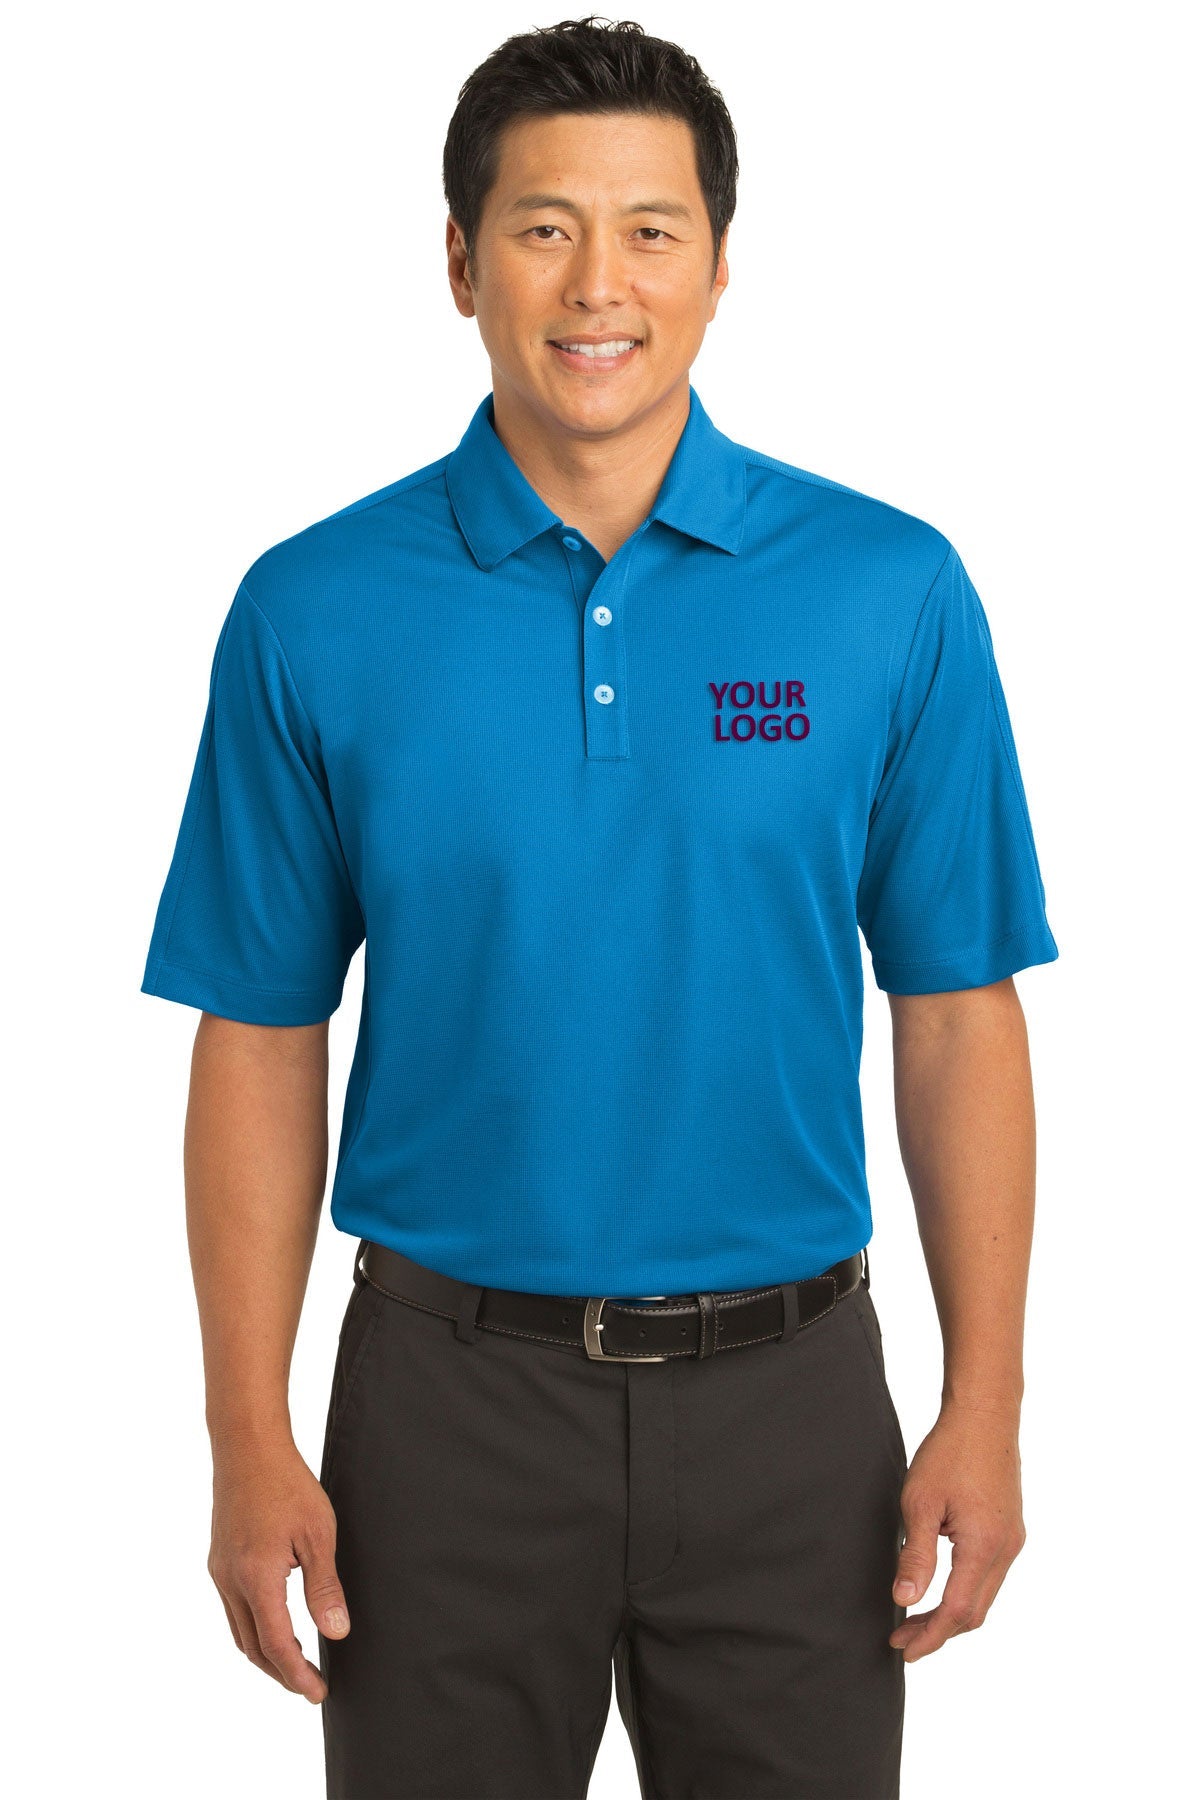 nike pacific blue 266998 embroidered work polo shirts